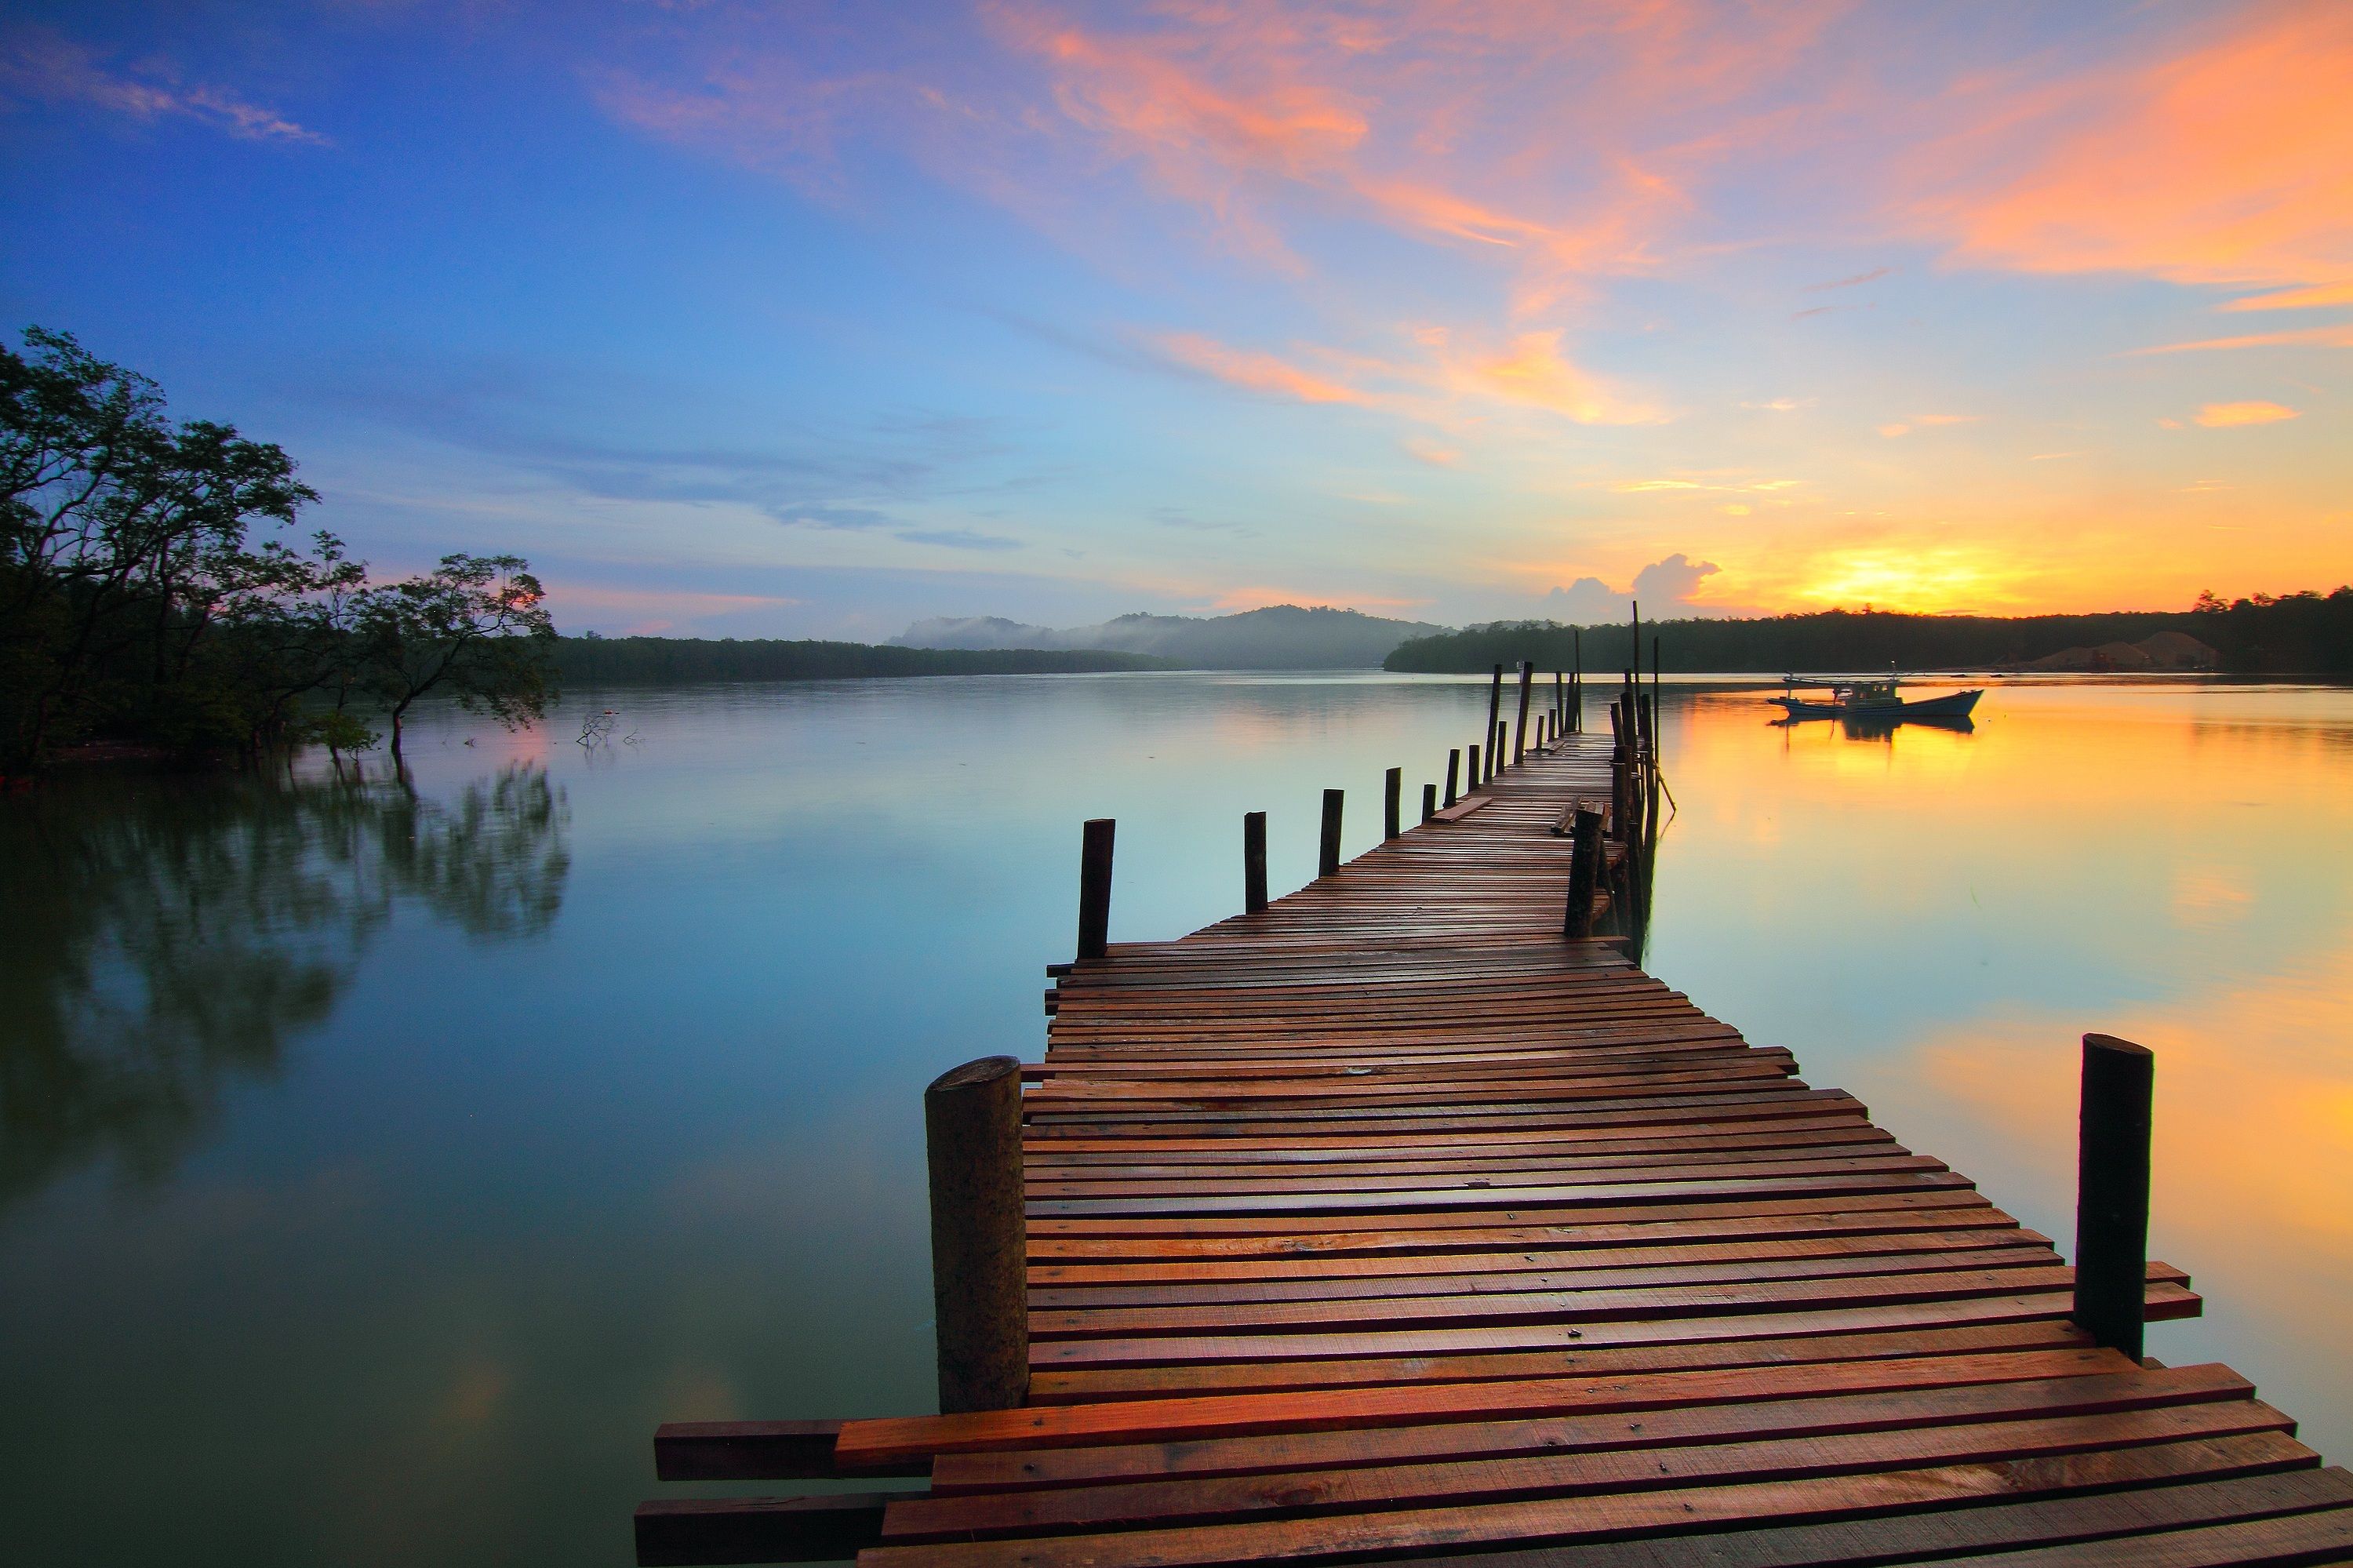 Sunrise over a lake jetty HD Wallpaper. Background Image